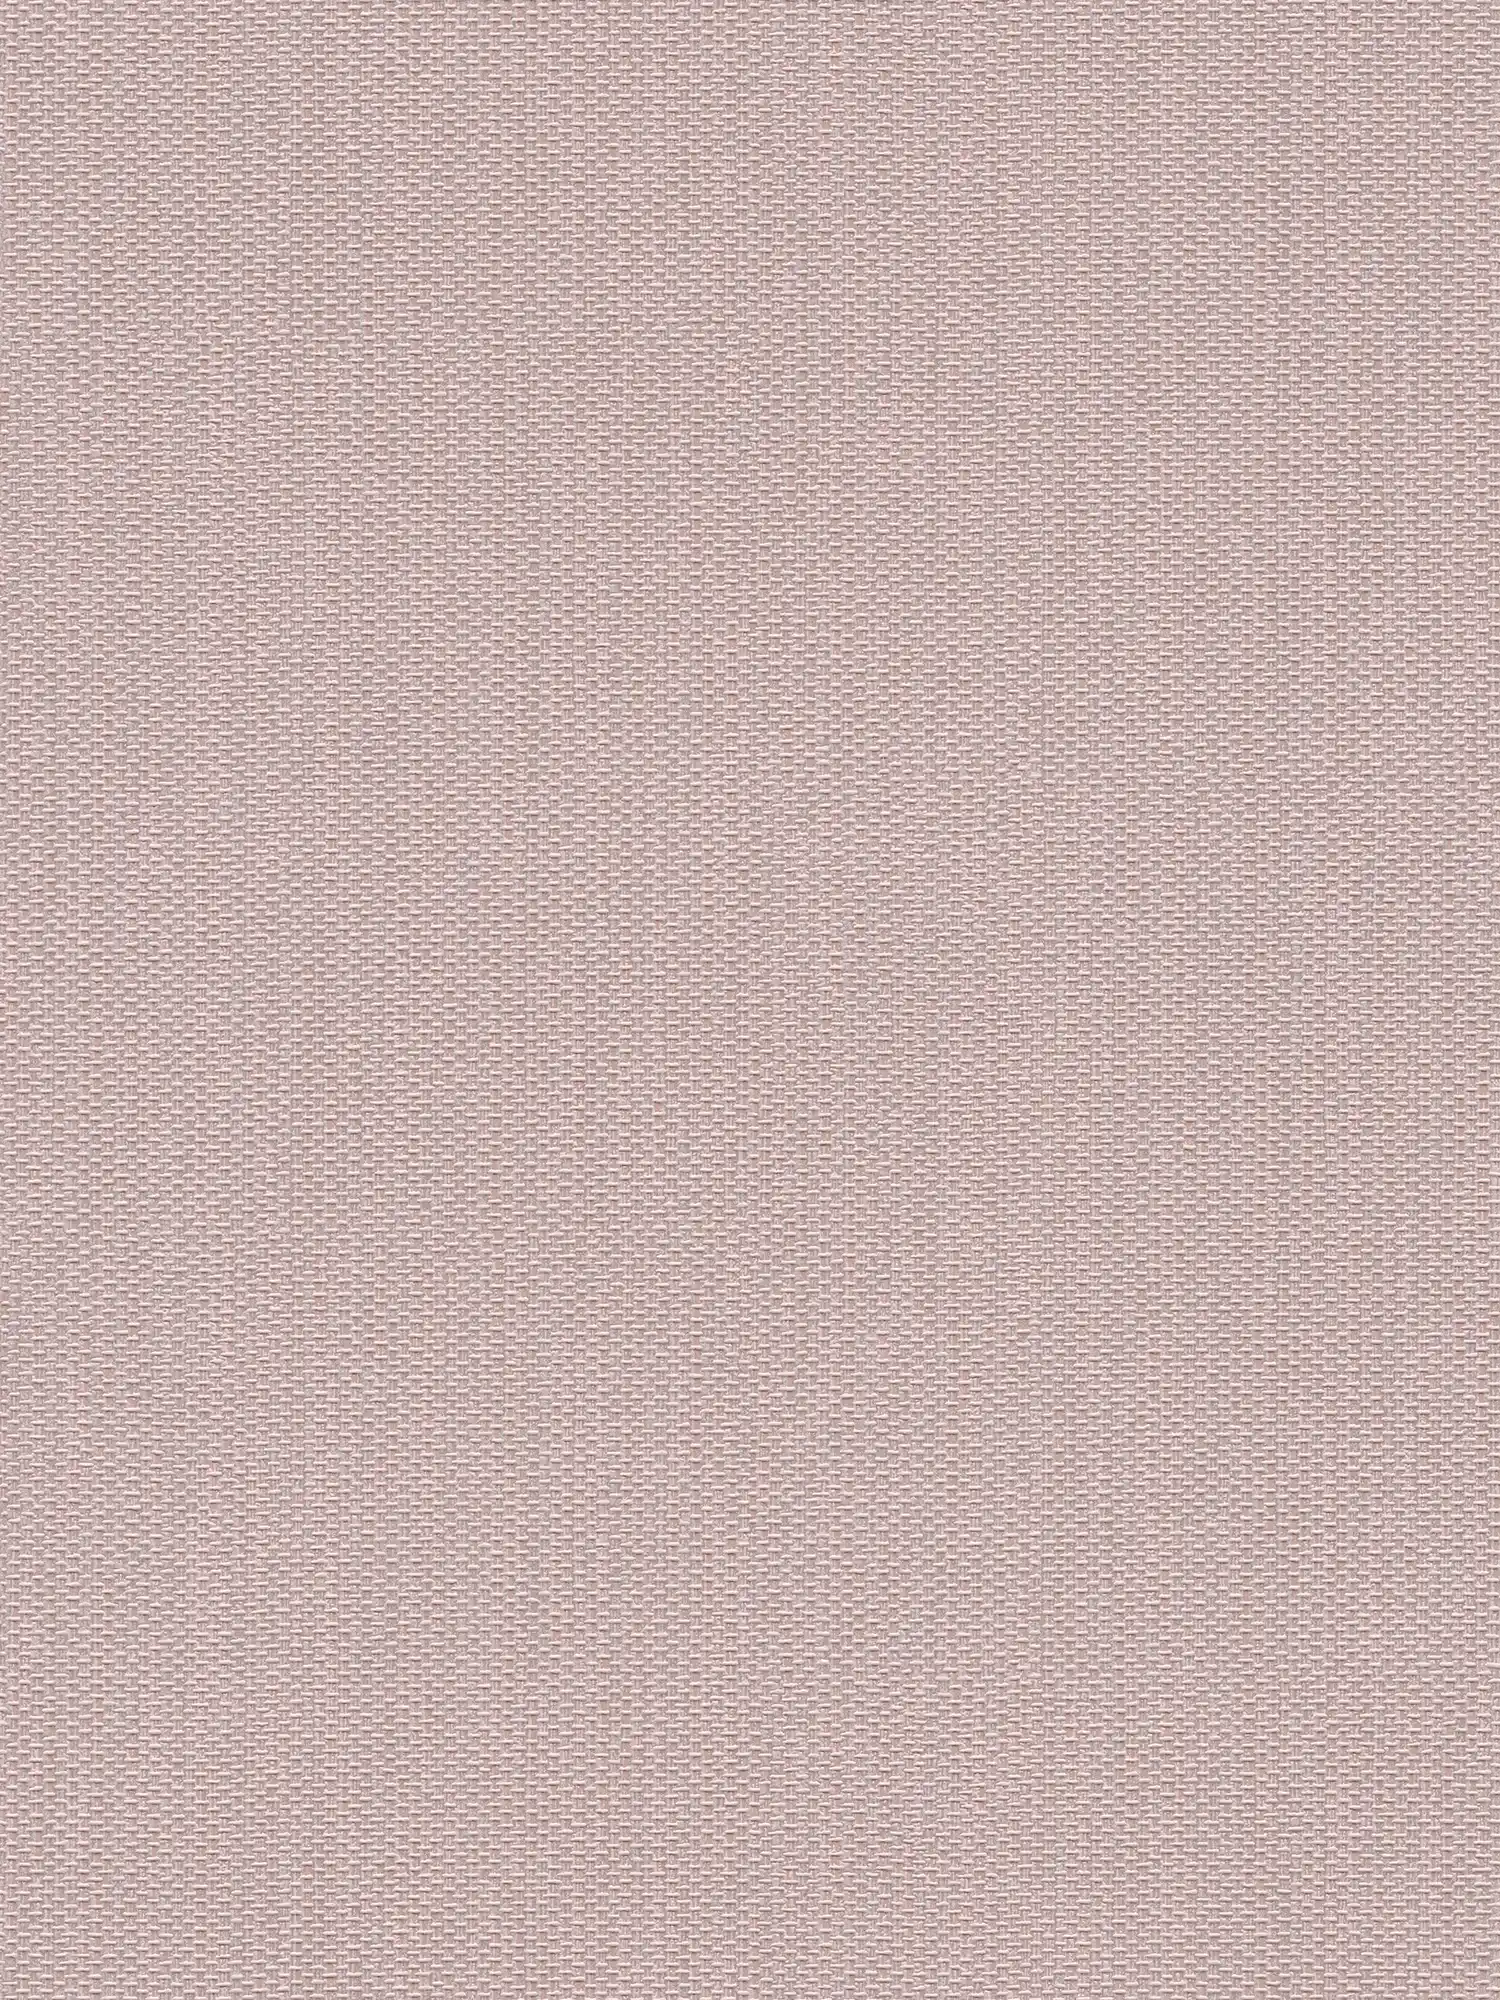 Textured non-woven wallpaper in textile look - pink, silver
